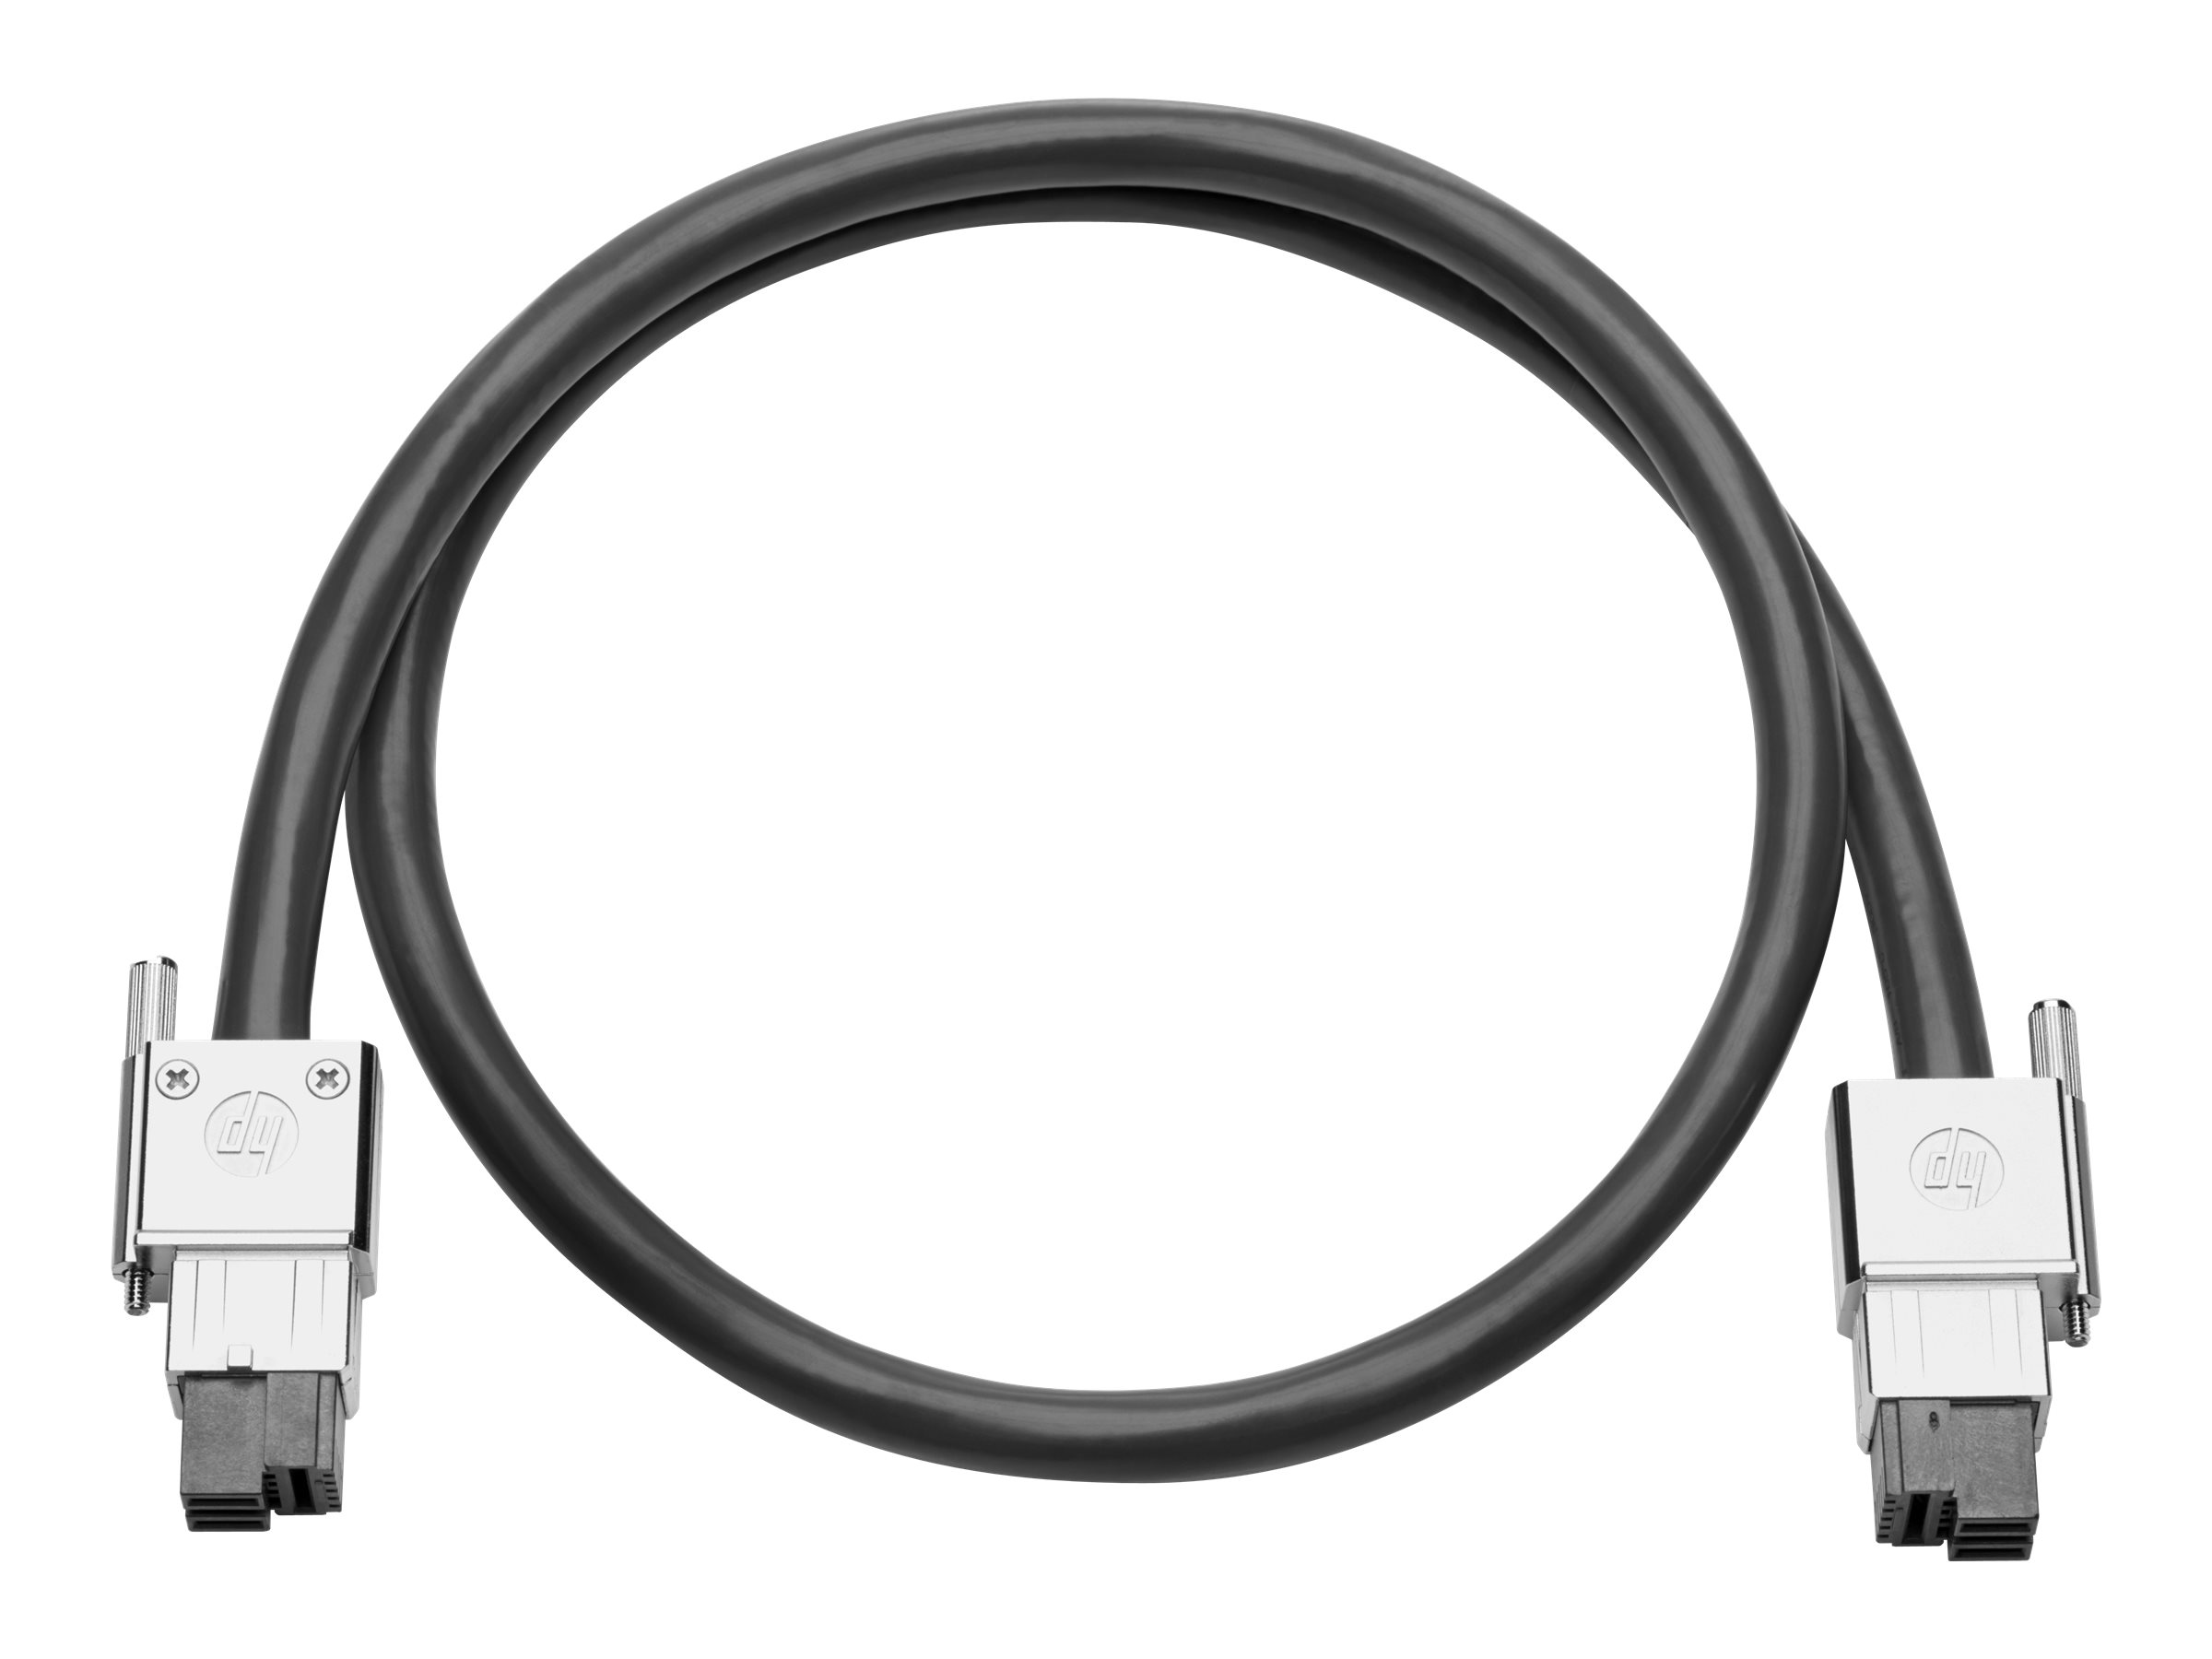 HP X290 1000 A JD5 Non-PoE 2m RPS Cable (JD188A)